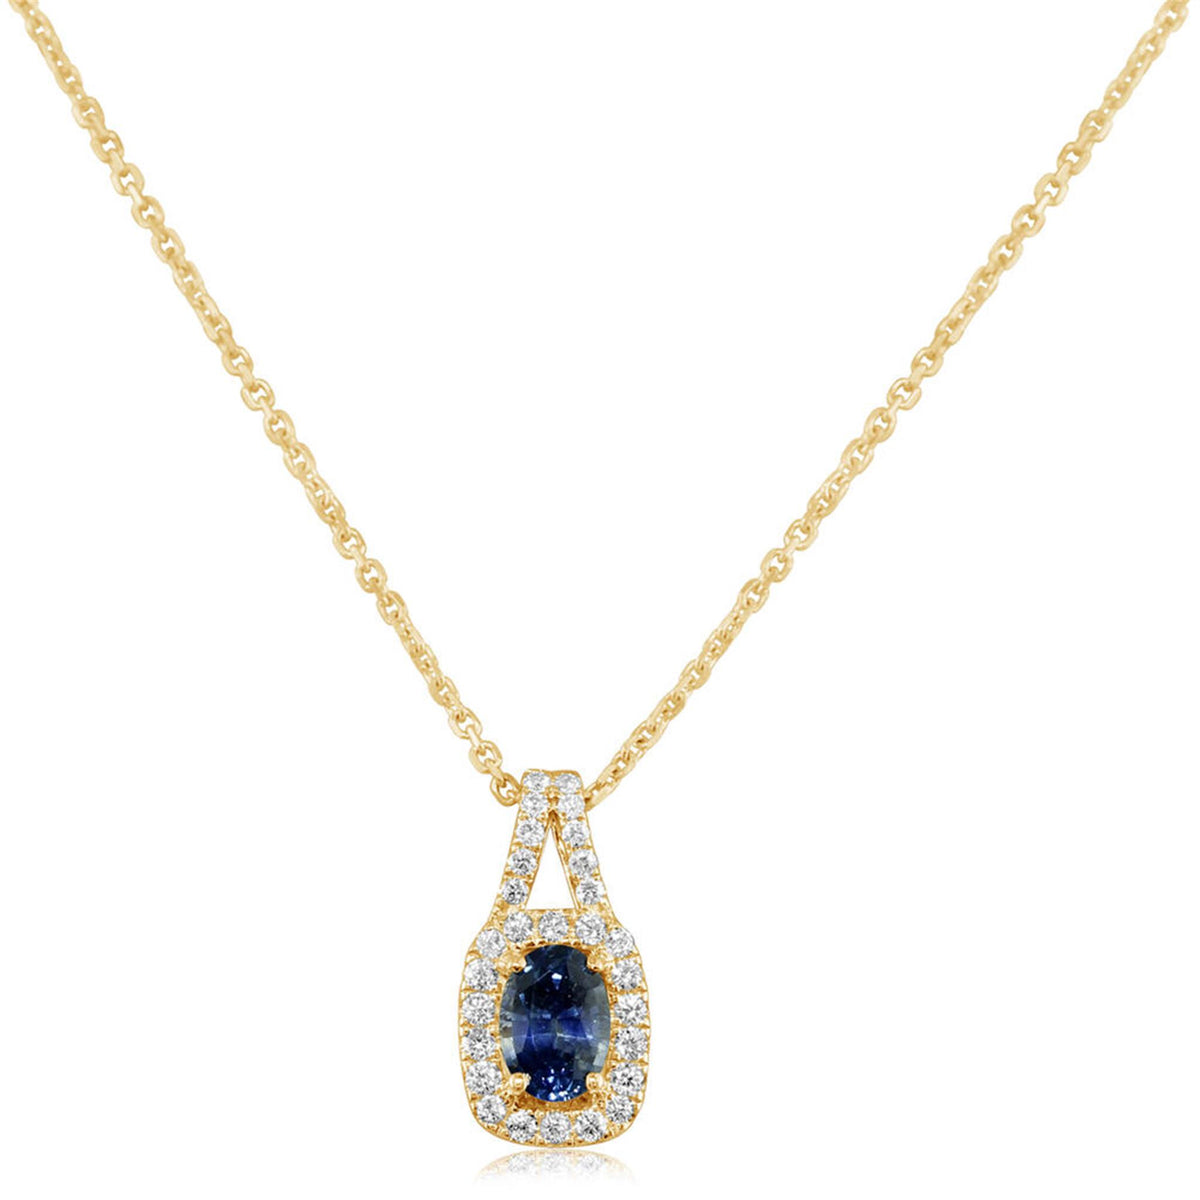 14Kt Yellow Gold Halo Gemstone Pendant With 0.61ct Sapphire